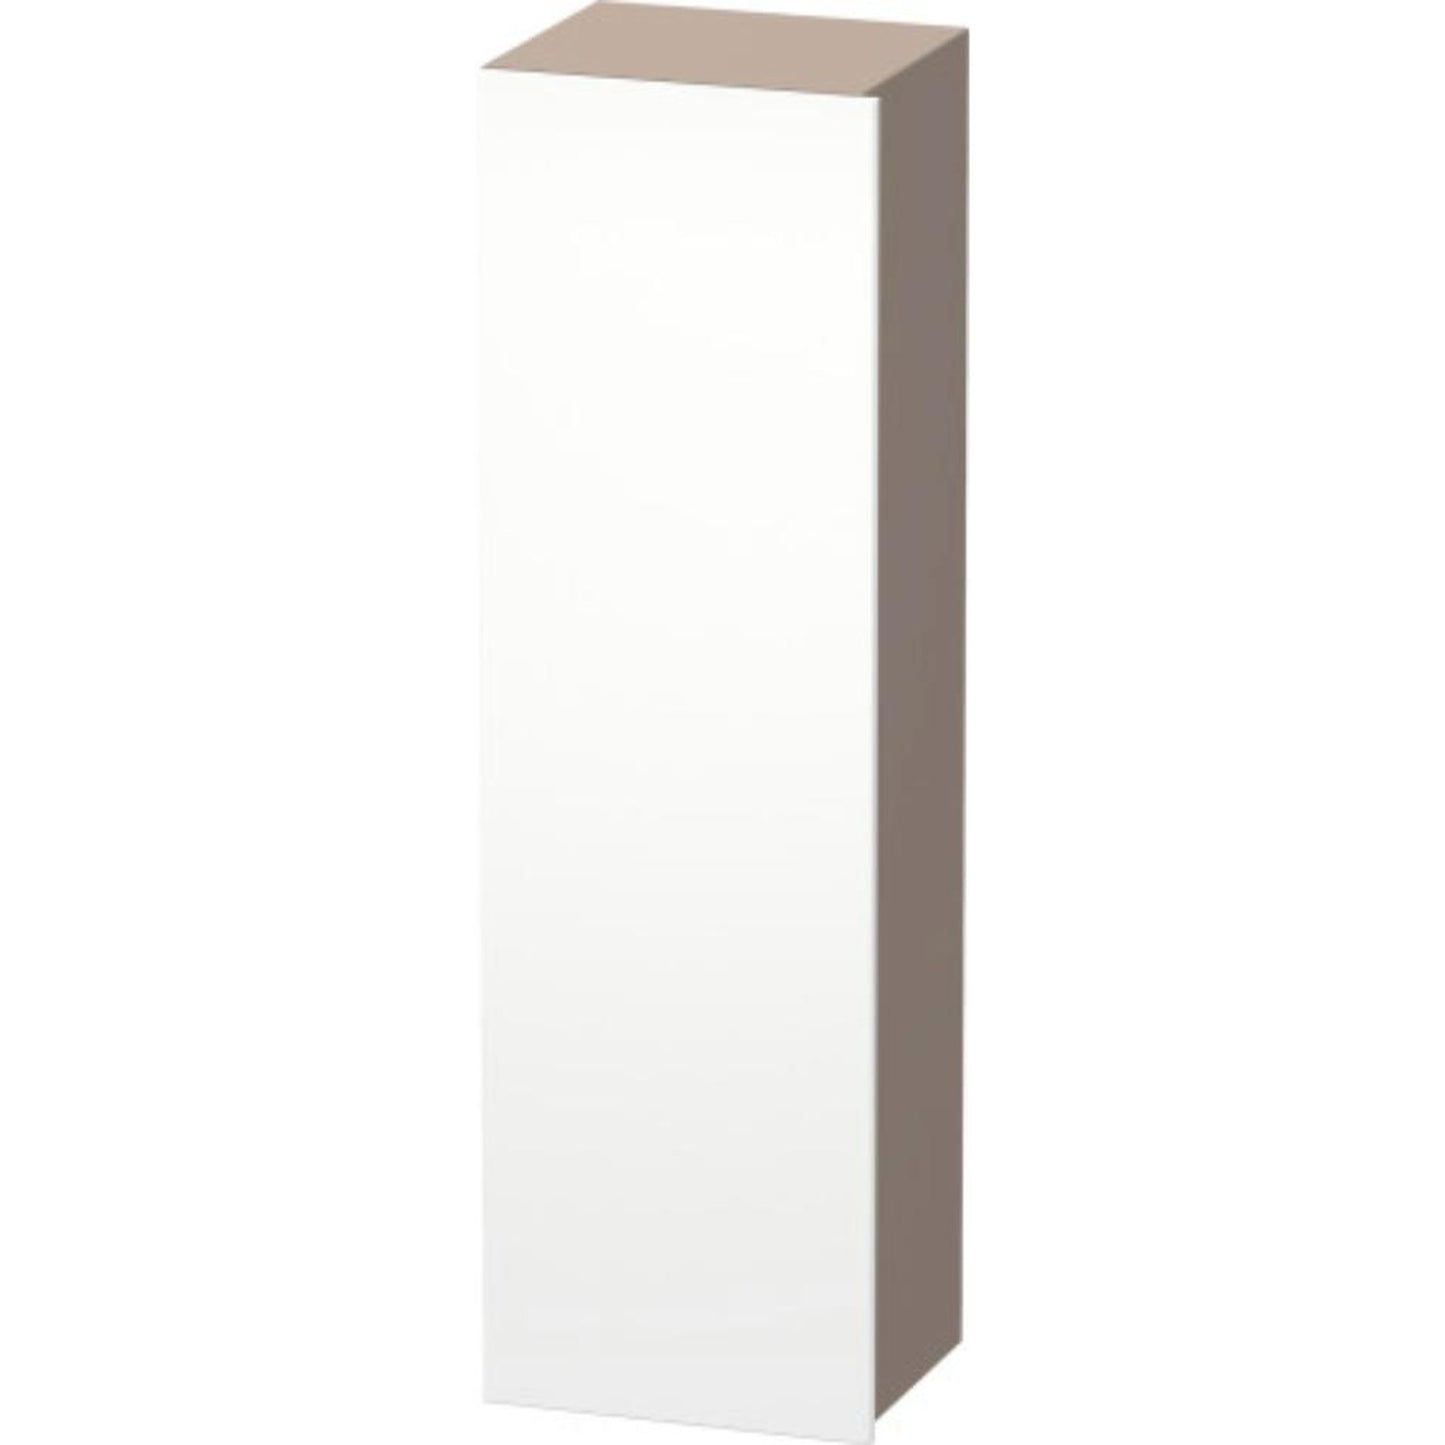 Duravit DuraStyle 16" x 55" x 14" Tall Cabinet With Left Hinge One Door in White Matt and Basalt (DS1219L1843)